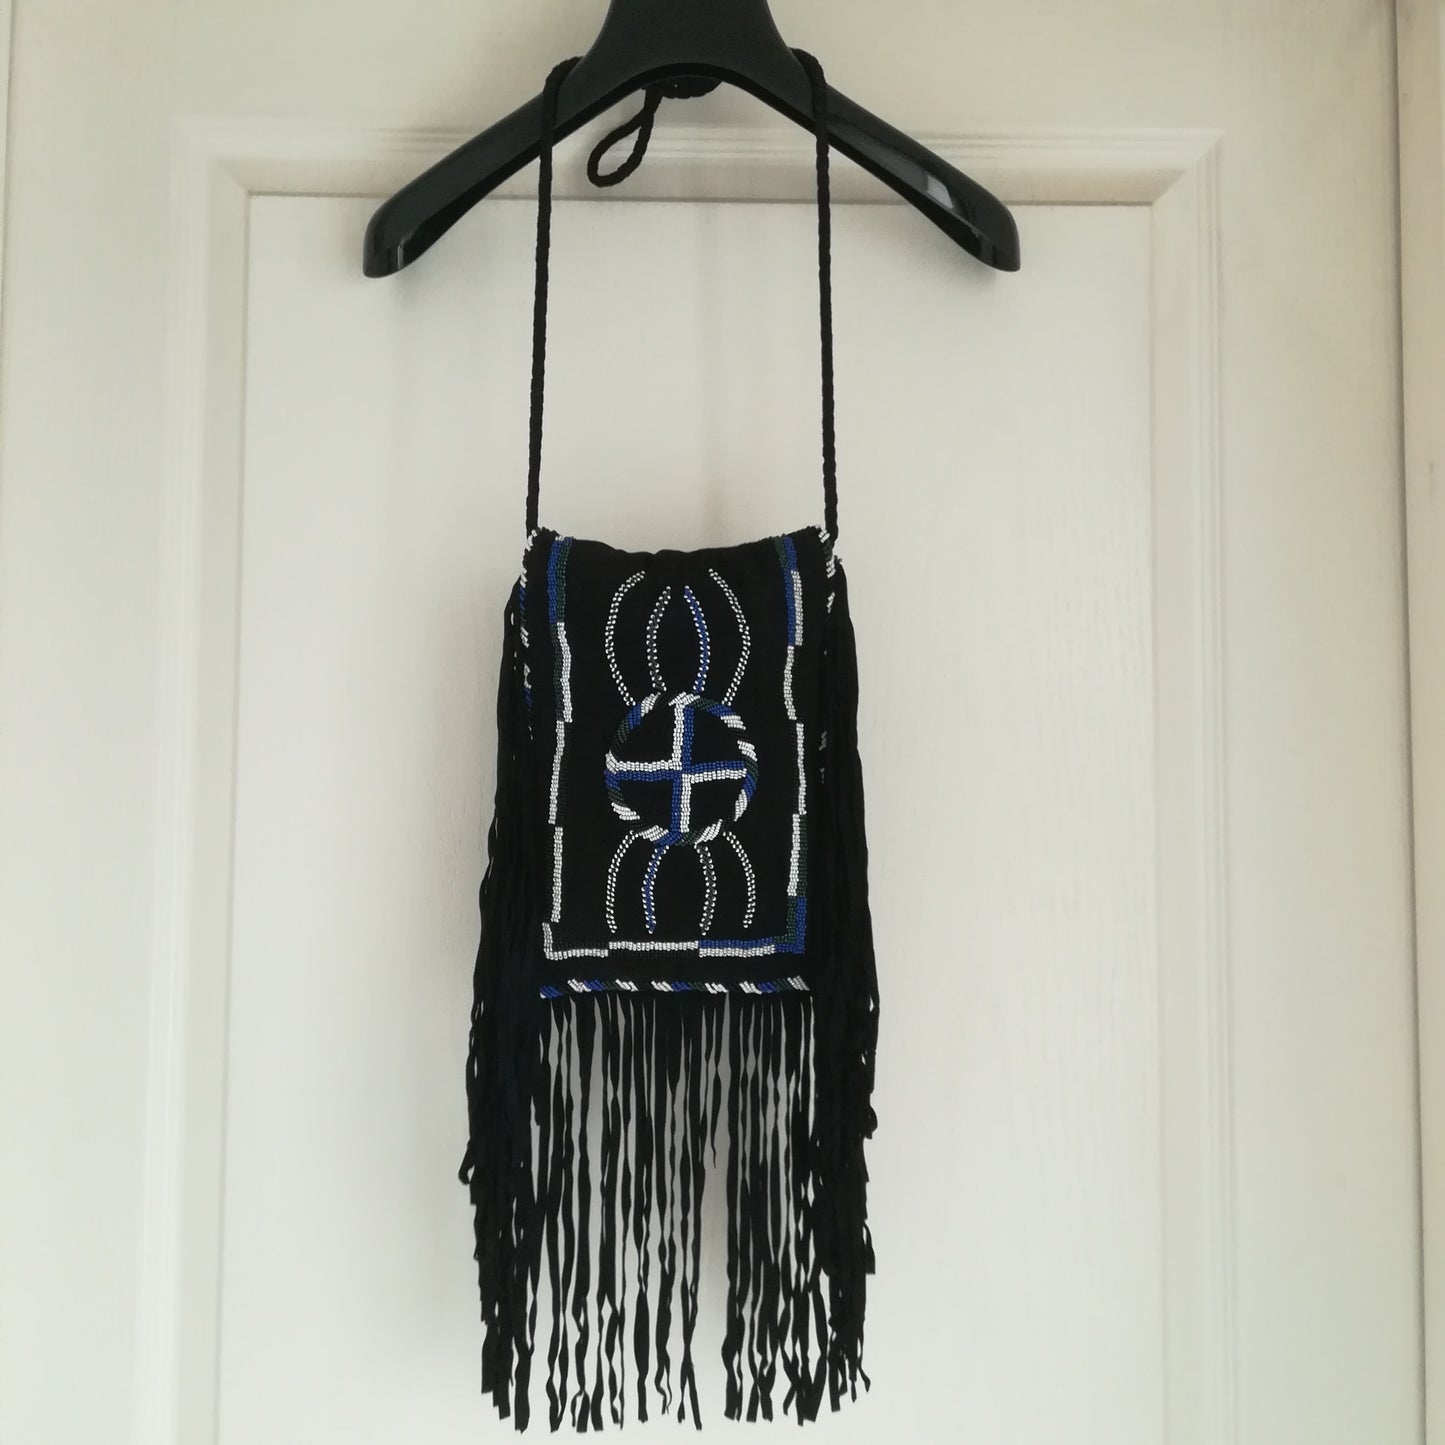 Black suede bag embroidered with pearls